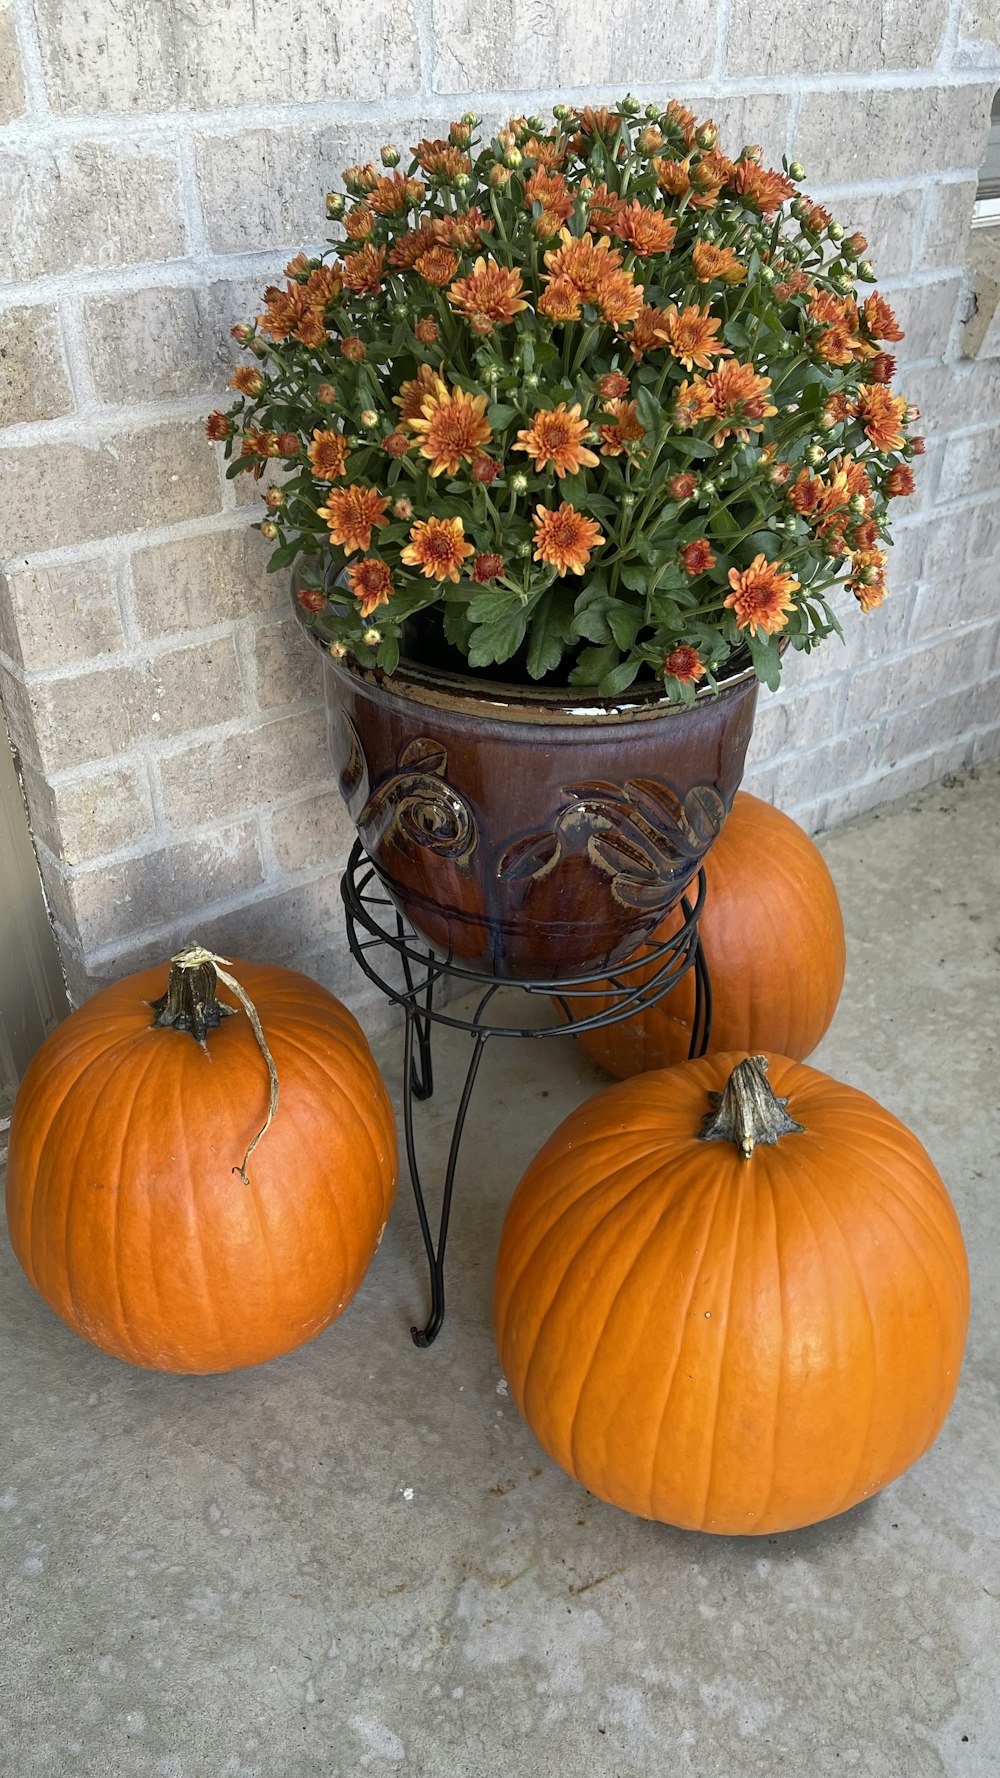 a potted plant sitting next to three pumpkins